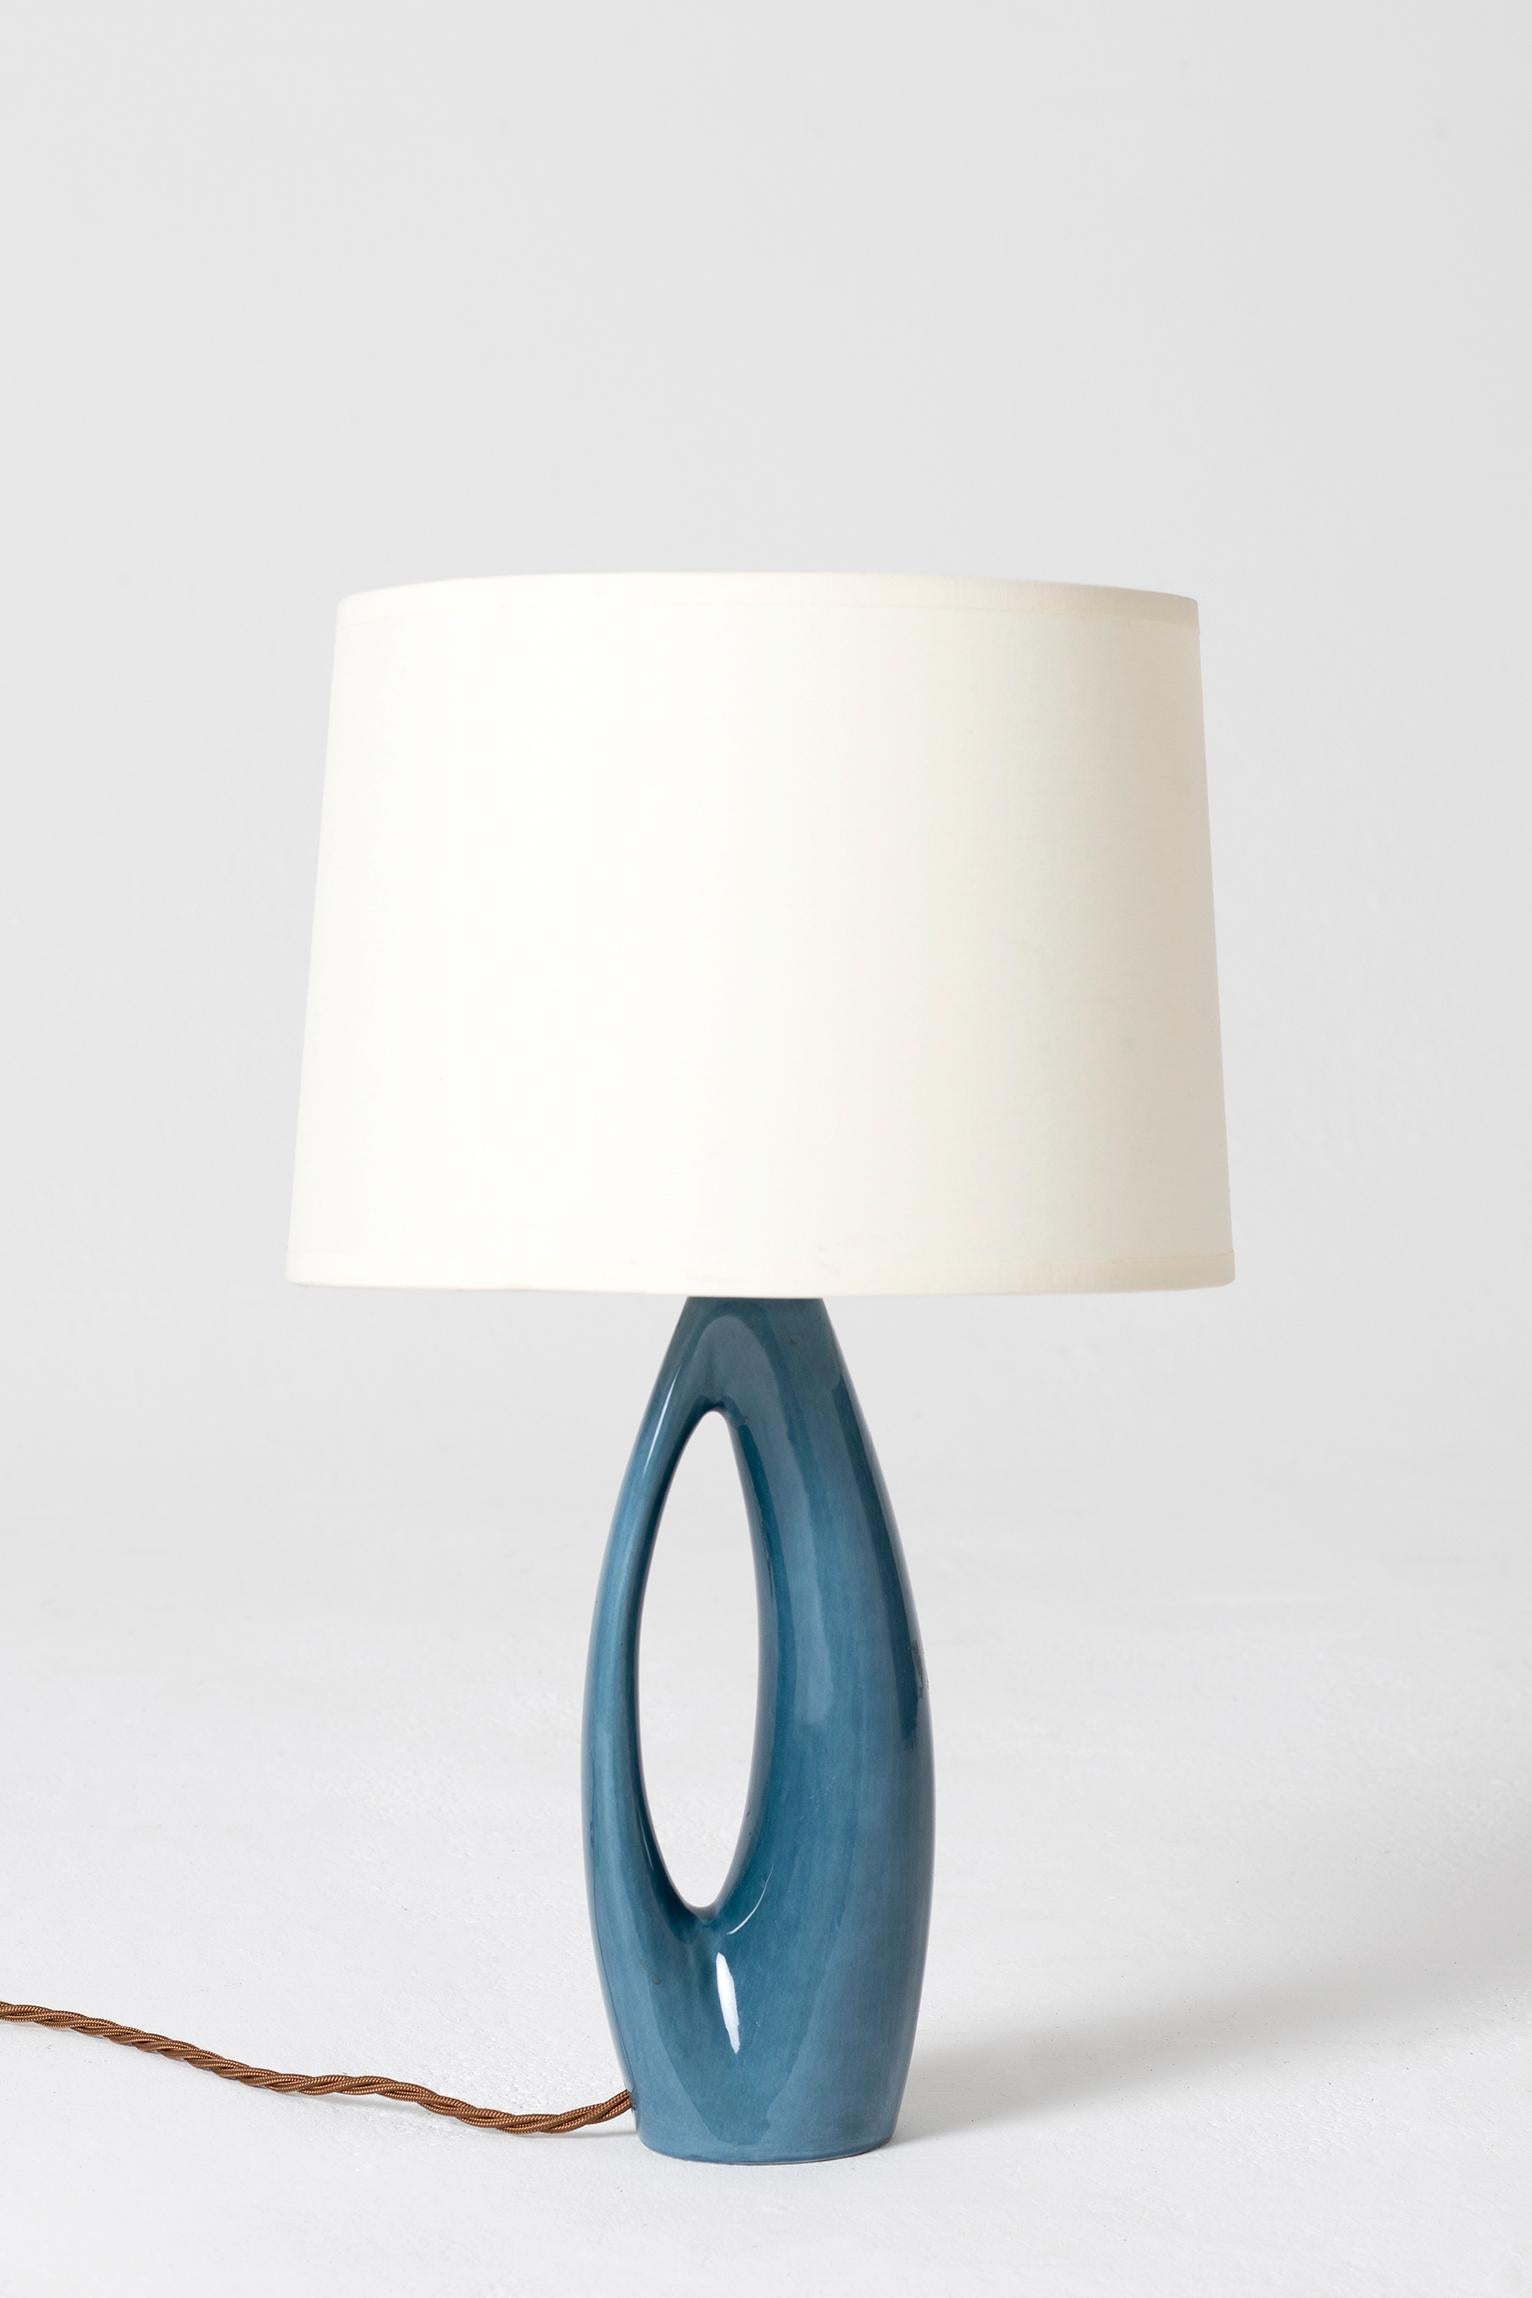 A blue ceramic table lamp by Rörstrand.
Stamped with the maker's mark of the famous Rörstrand porcelain manufacture, the second oldest in Europe.
Sweden, 1950s.
With the shade: 42 cm high by 25 cm diameter
Ceramic only, excluding the brass